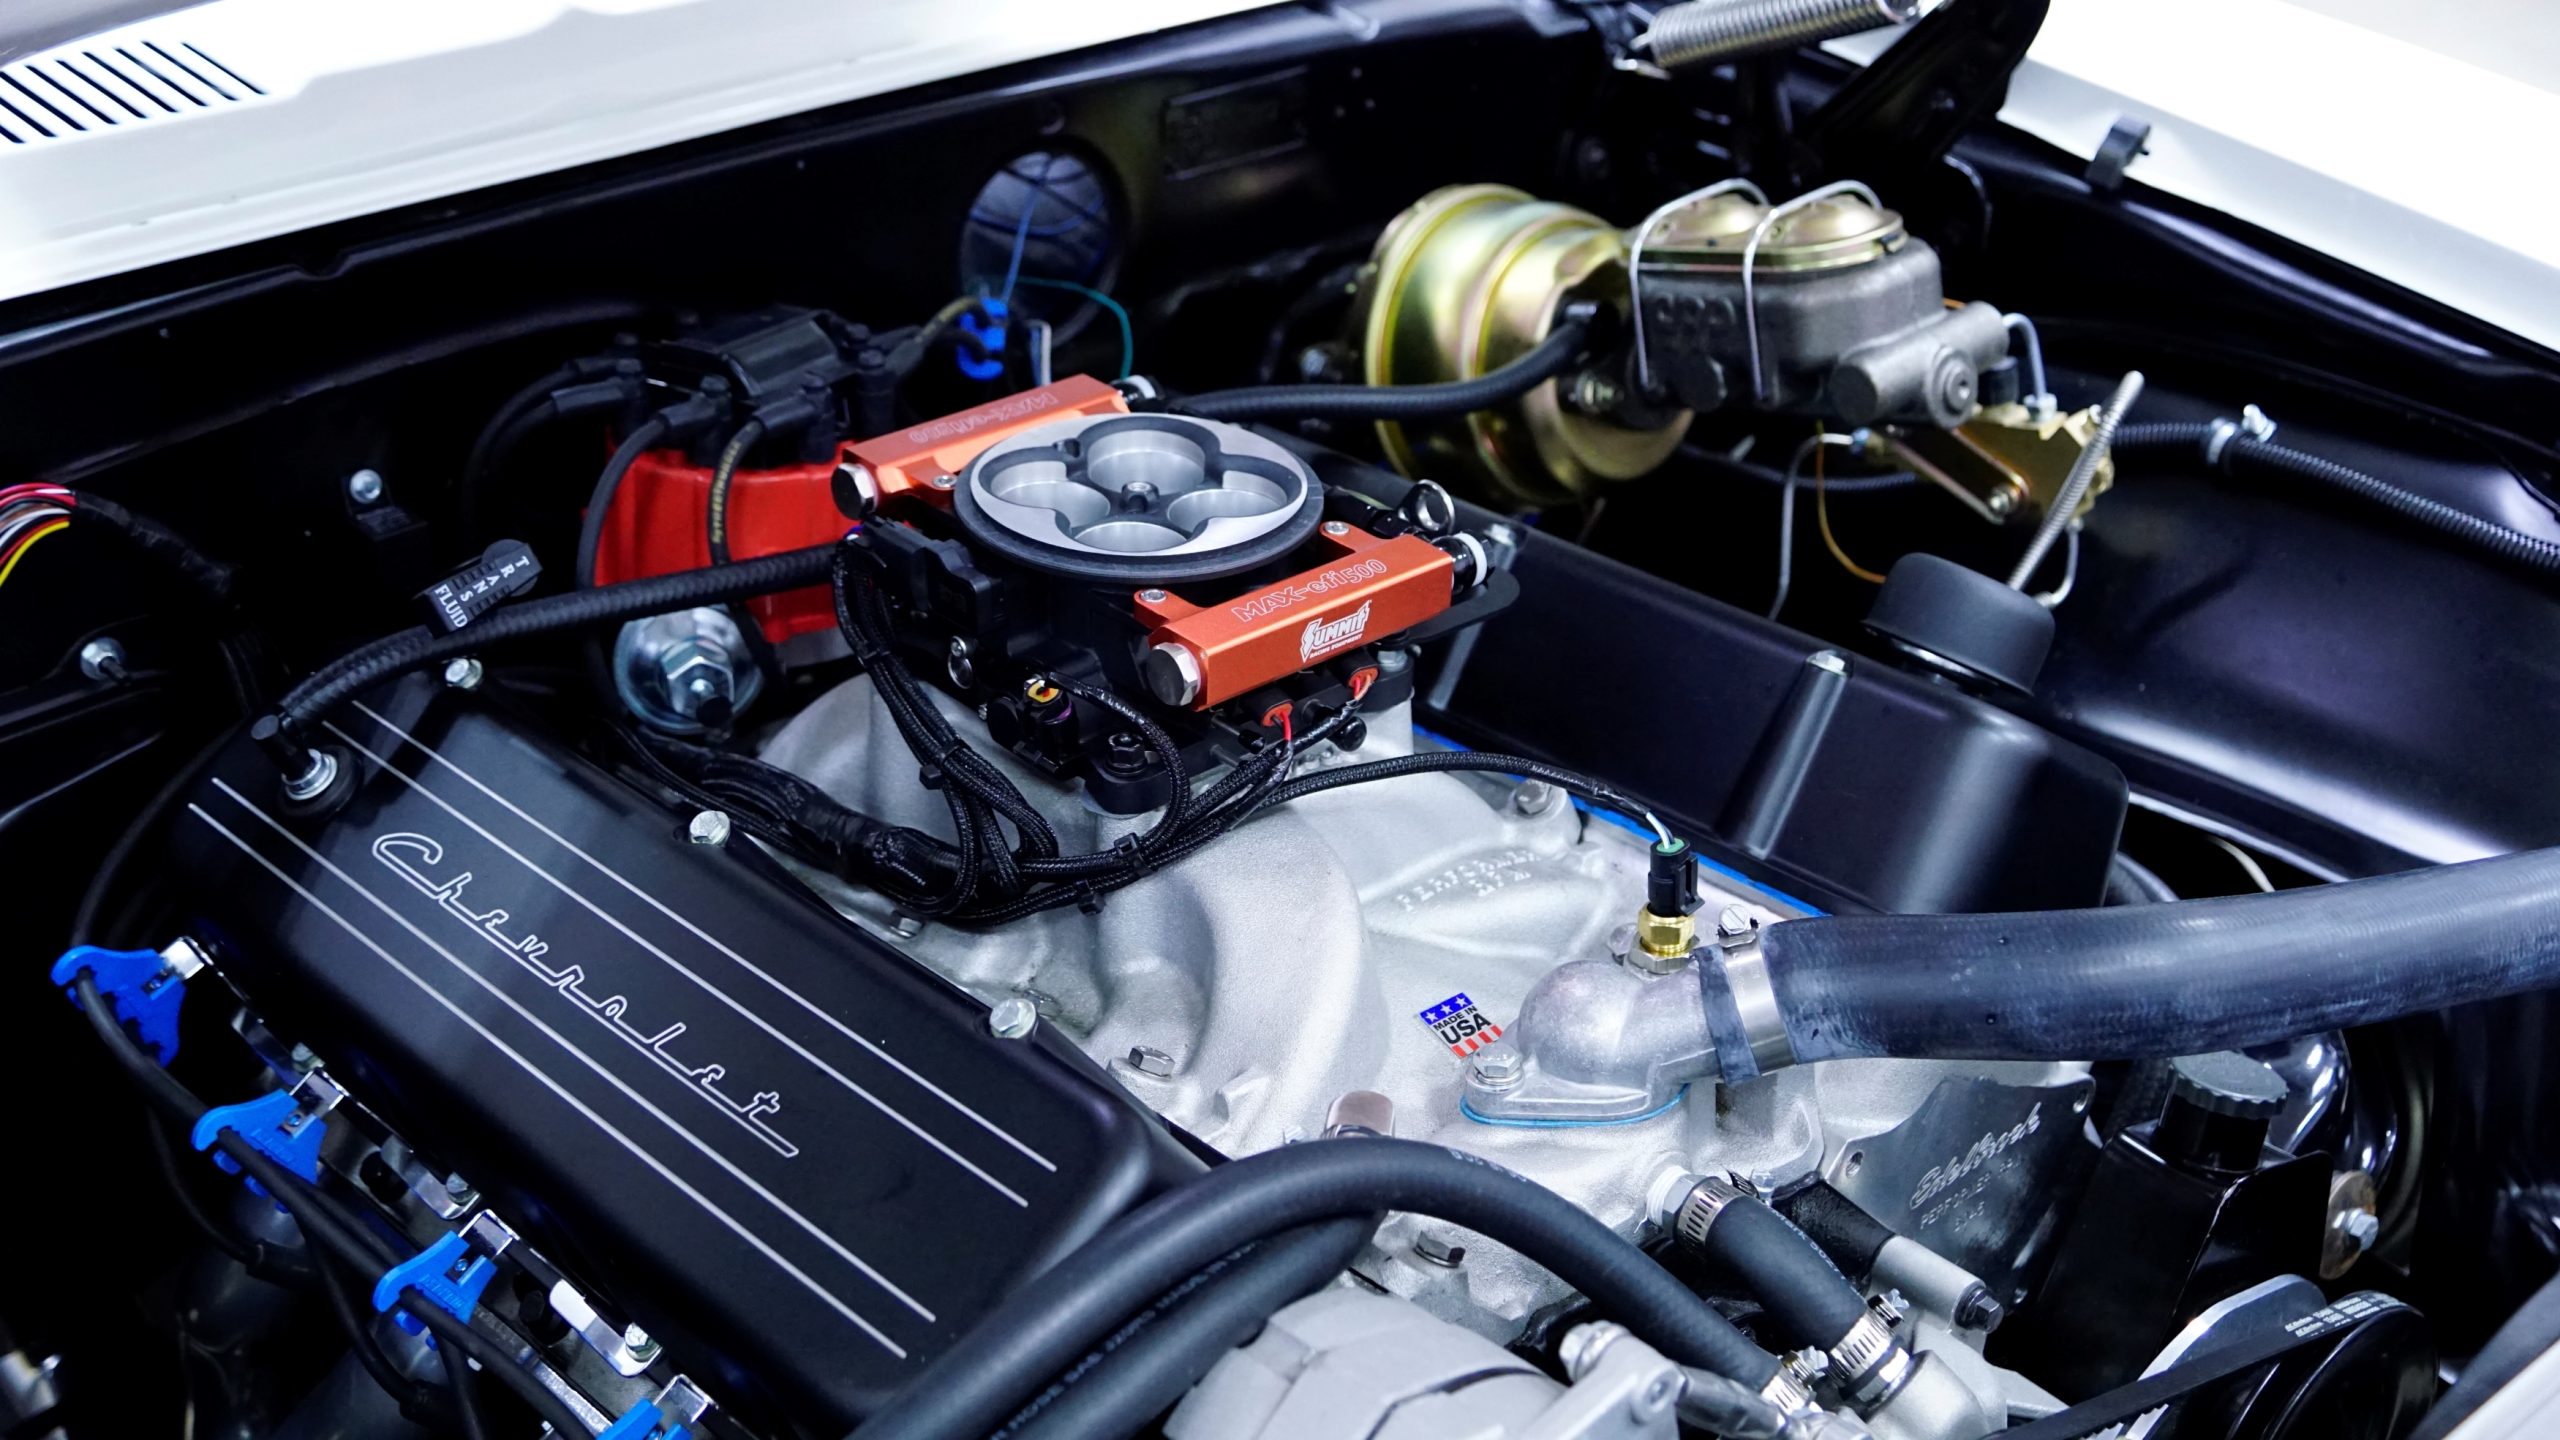 How To Convert Your Classic Car's Fuel Sending Unit Into An EFI